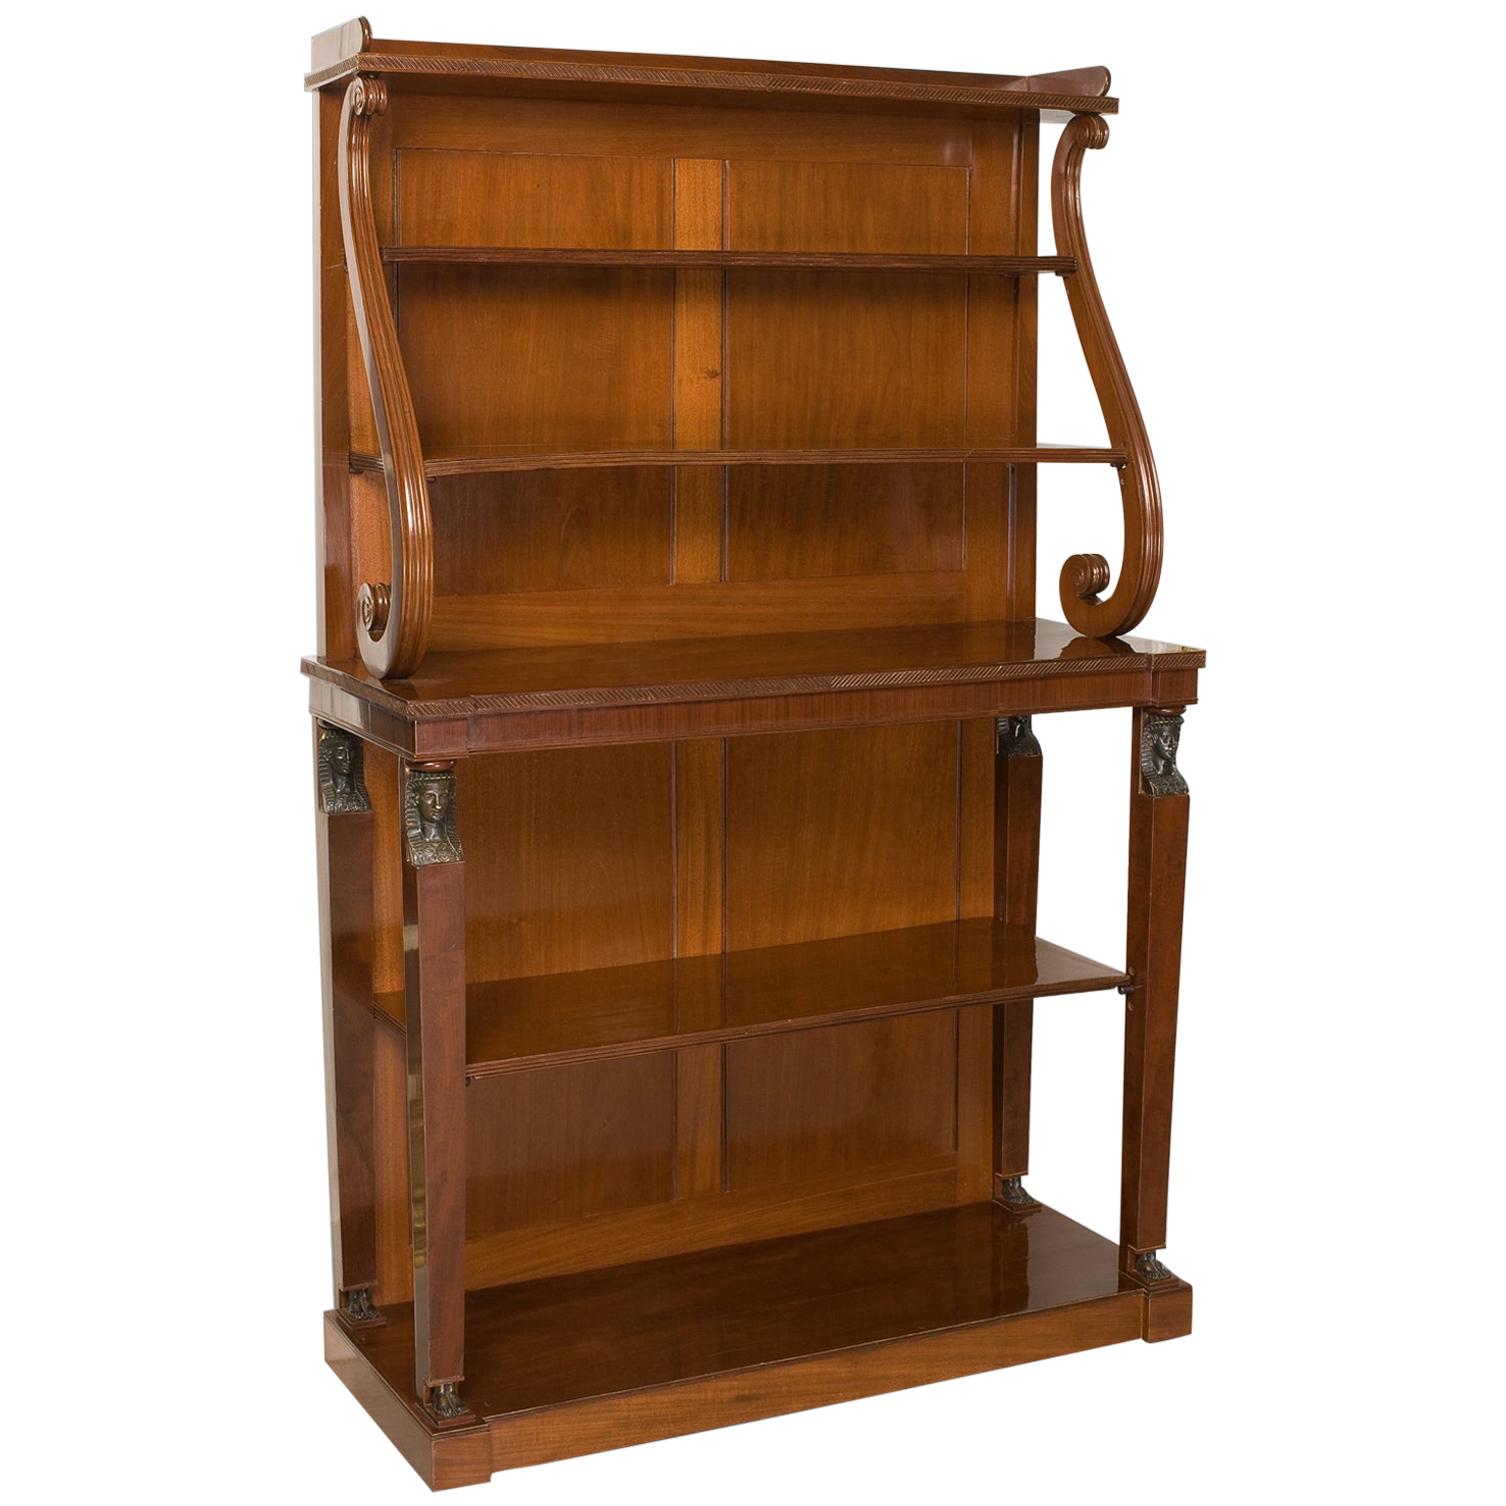 Fine Quality Open Bookcase, Regency Period, Early 19th Century